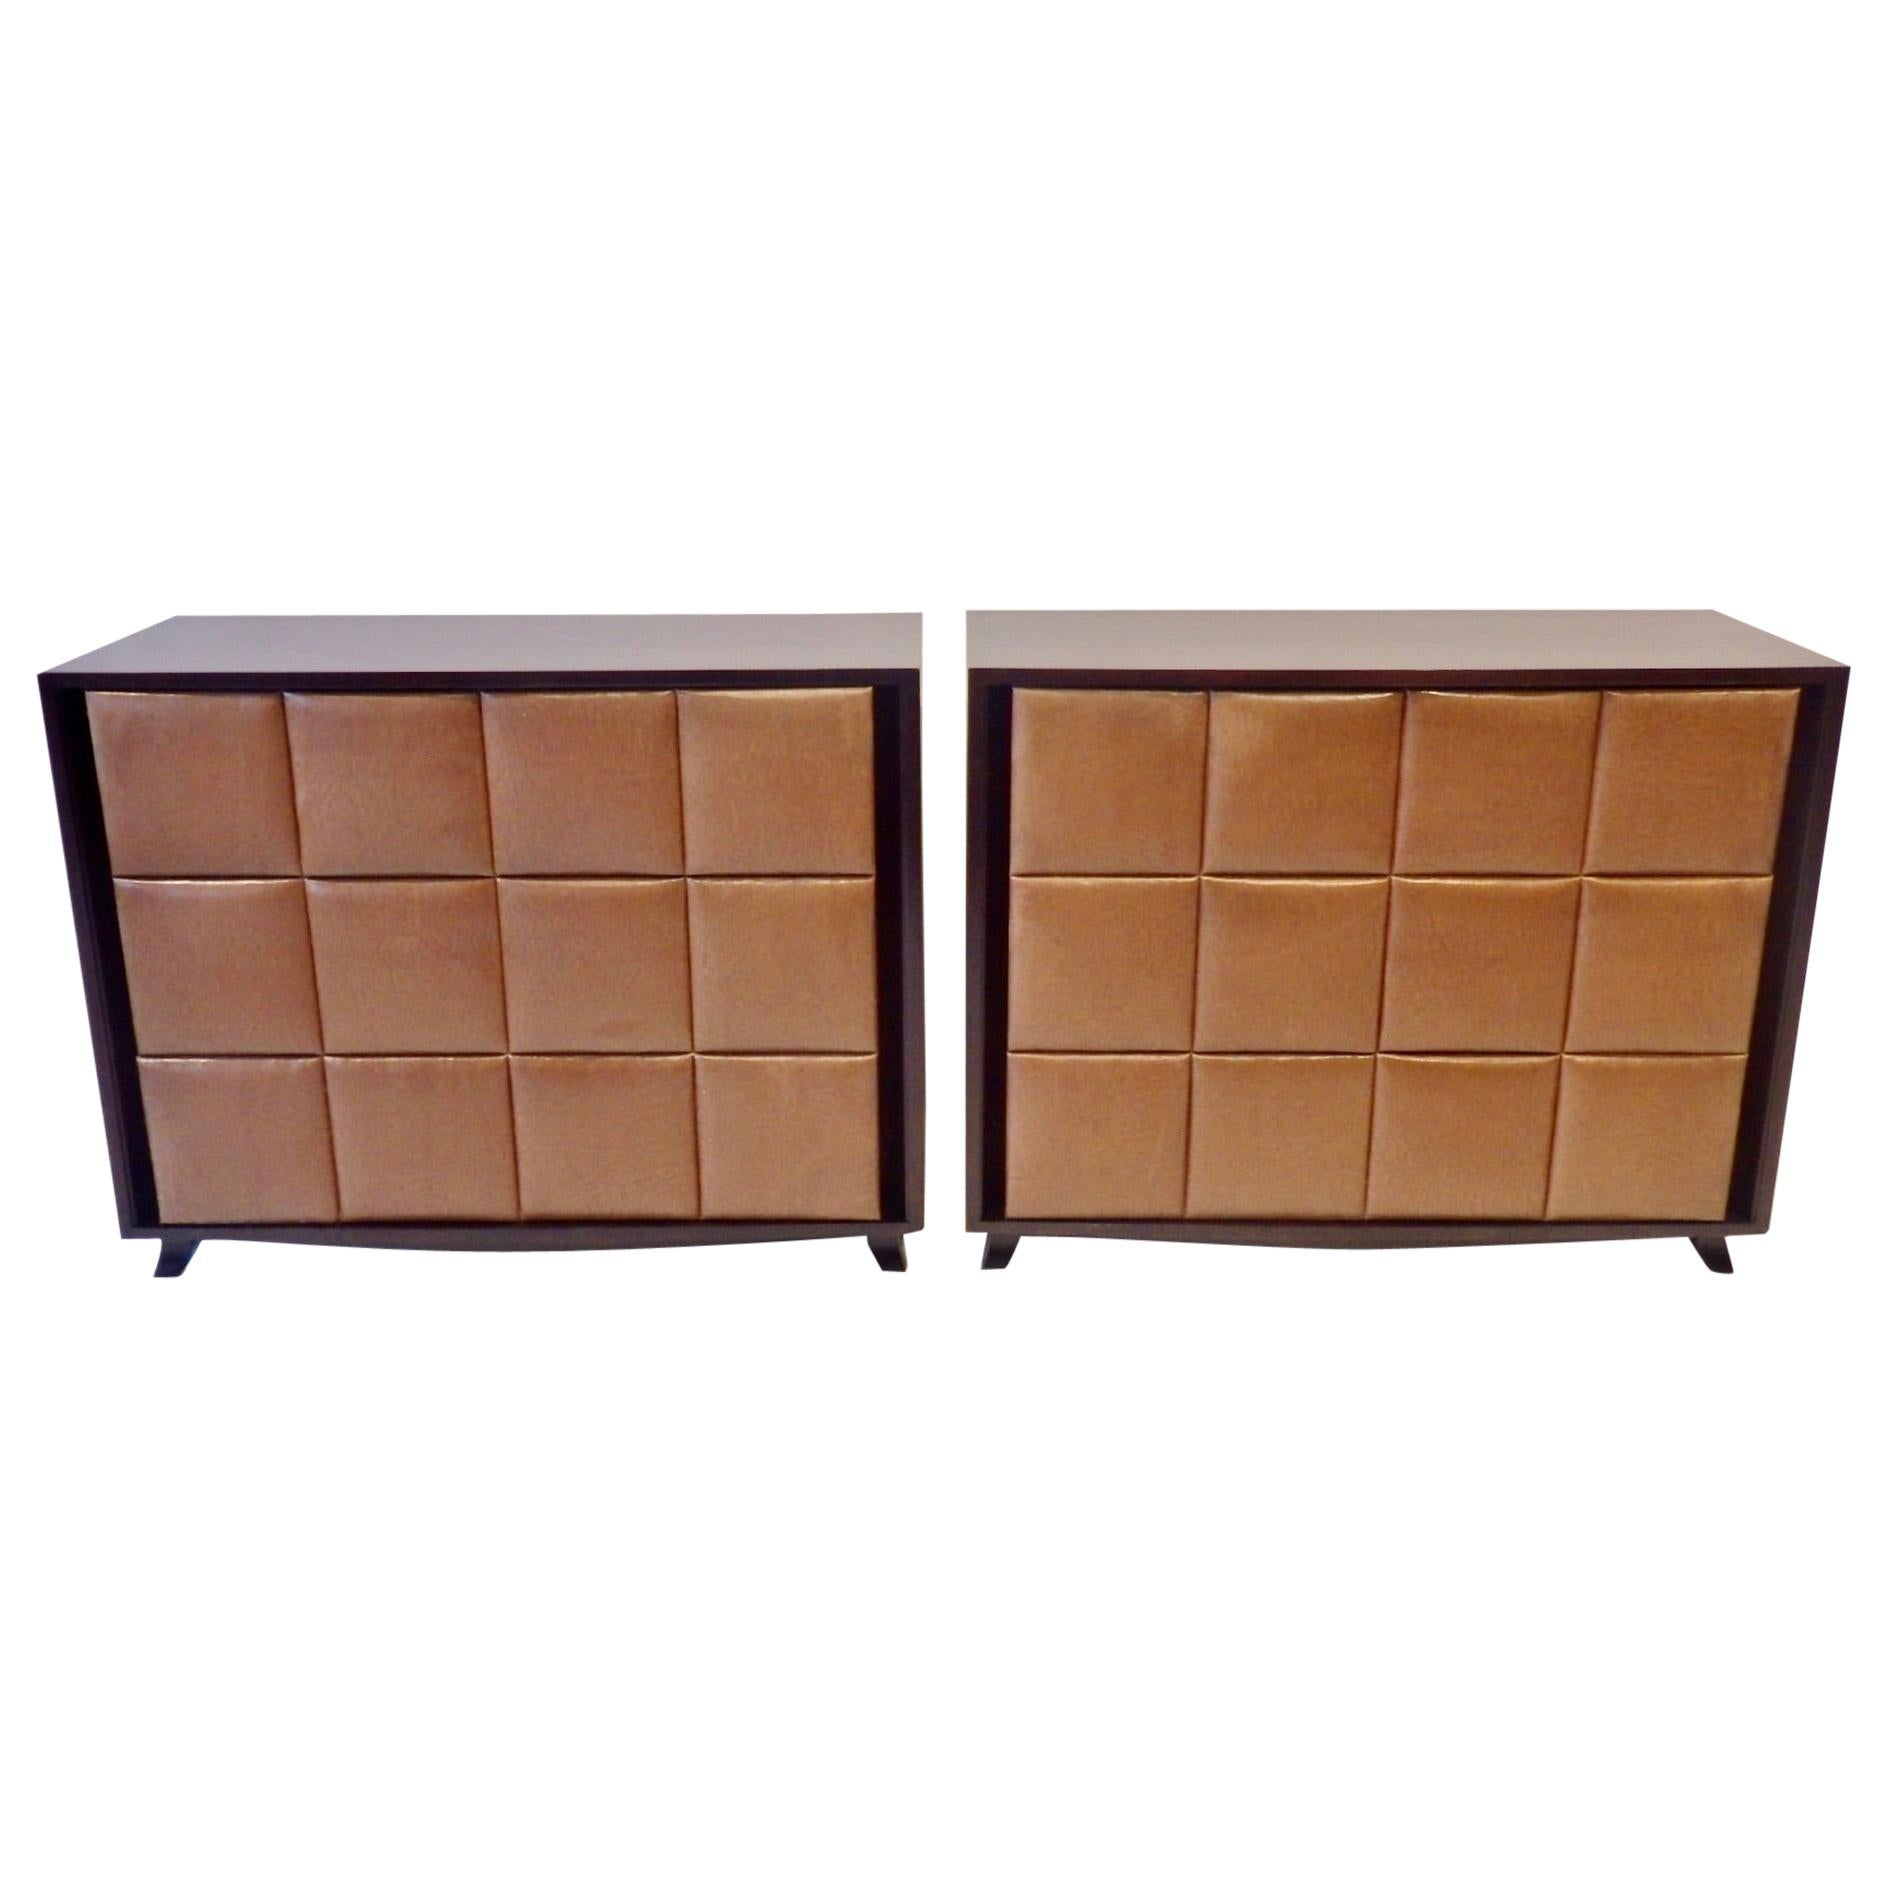 Pair of Gilbert Rohde for Herman Miller Padded Front American Art Deco Chests